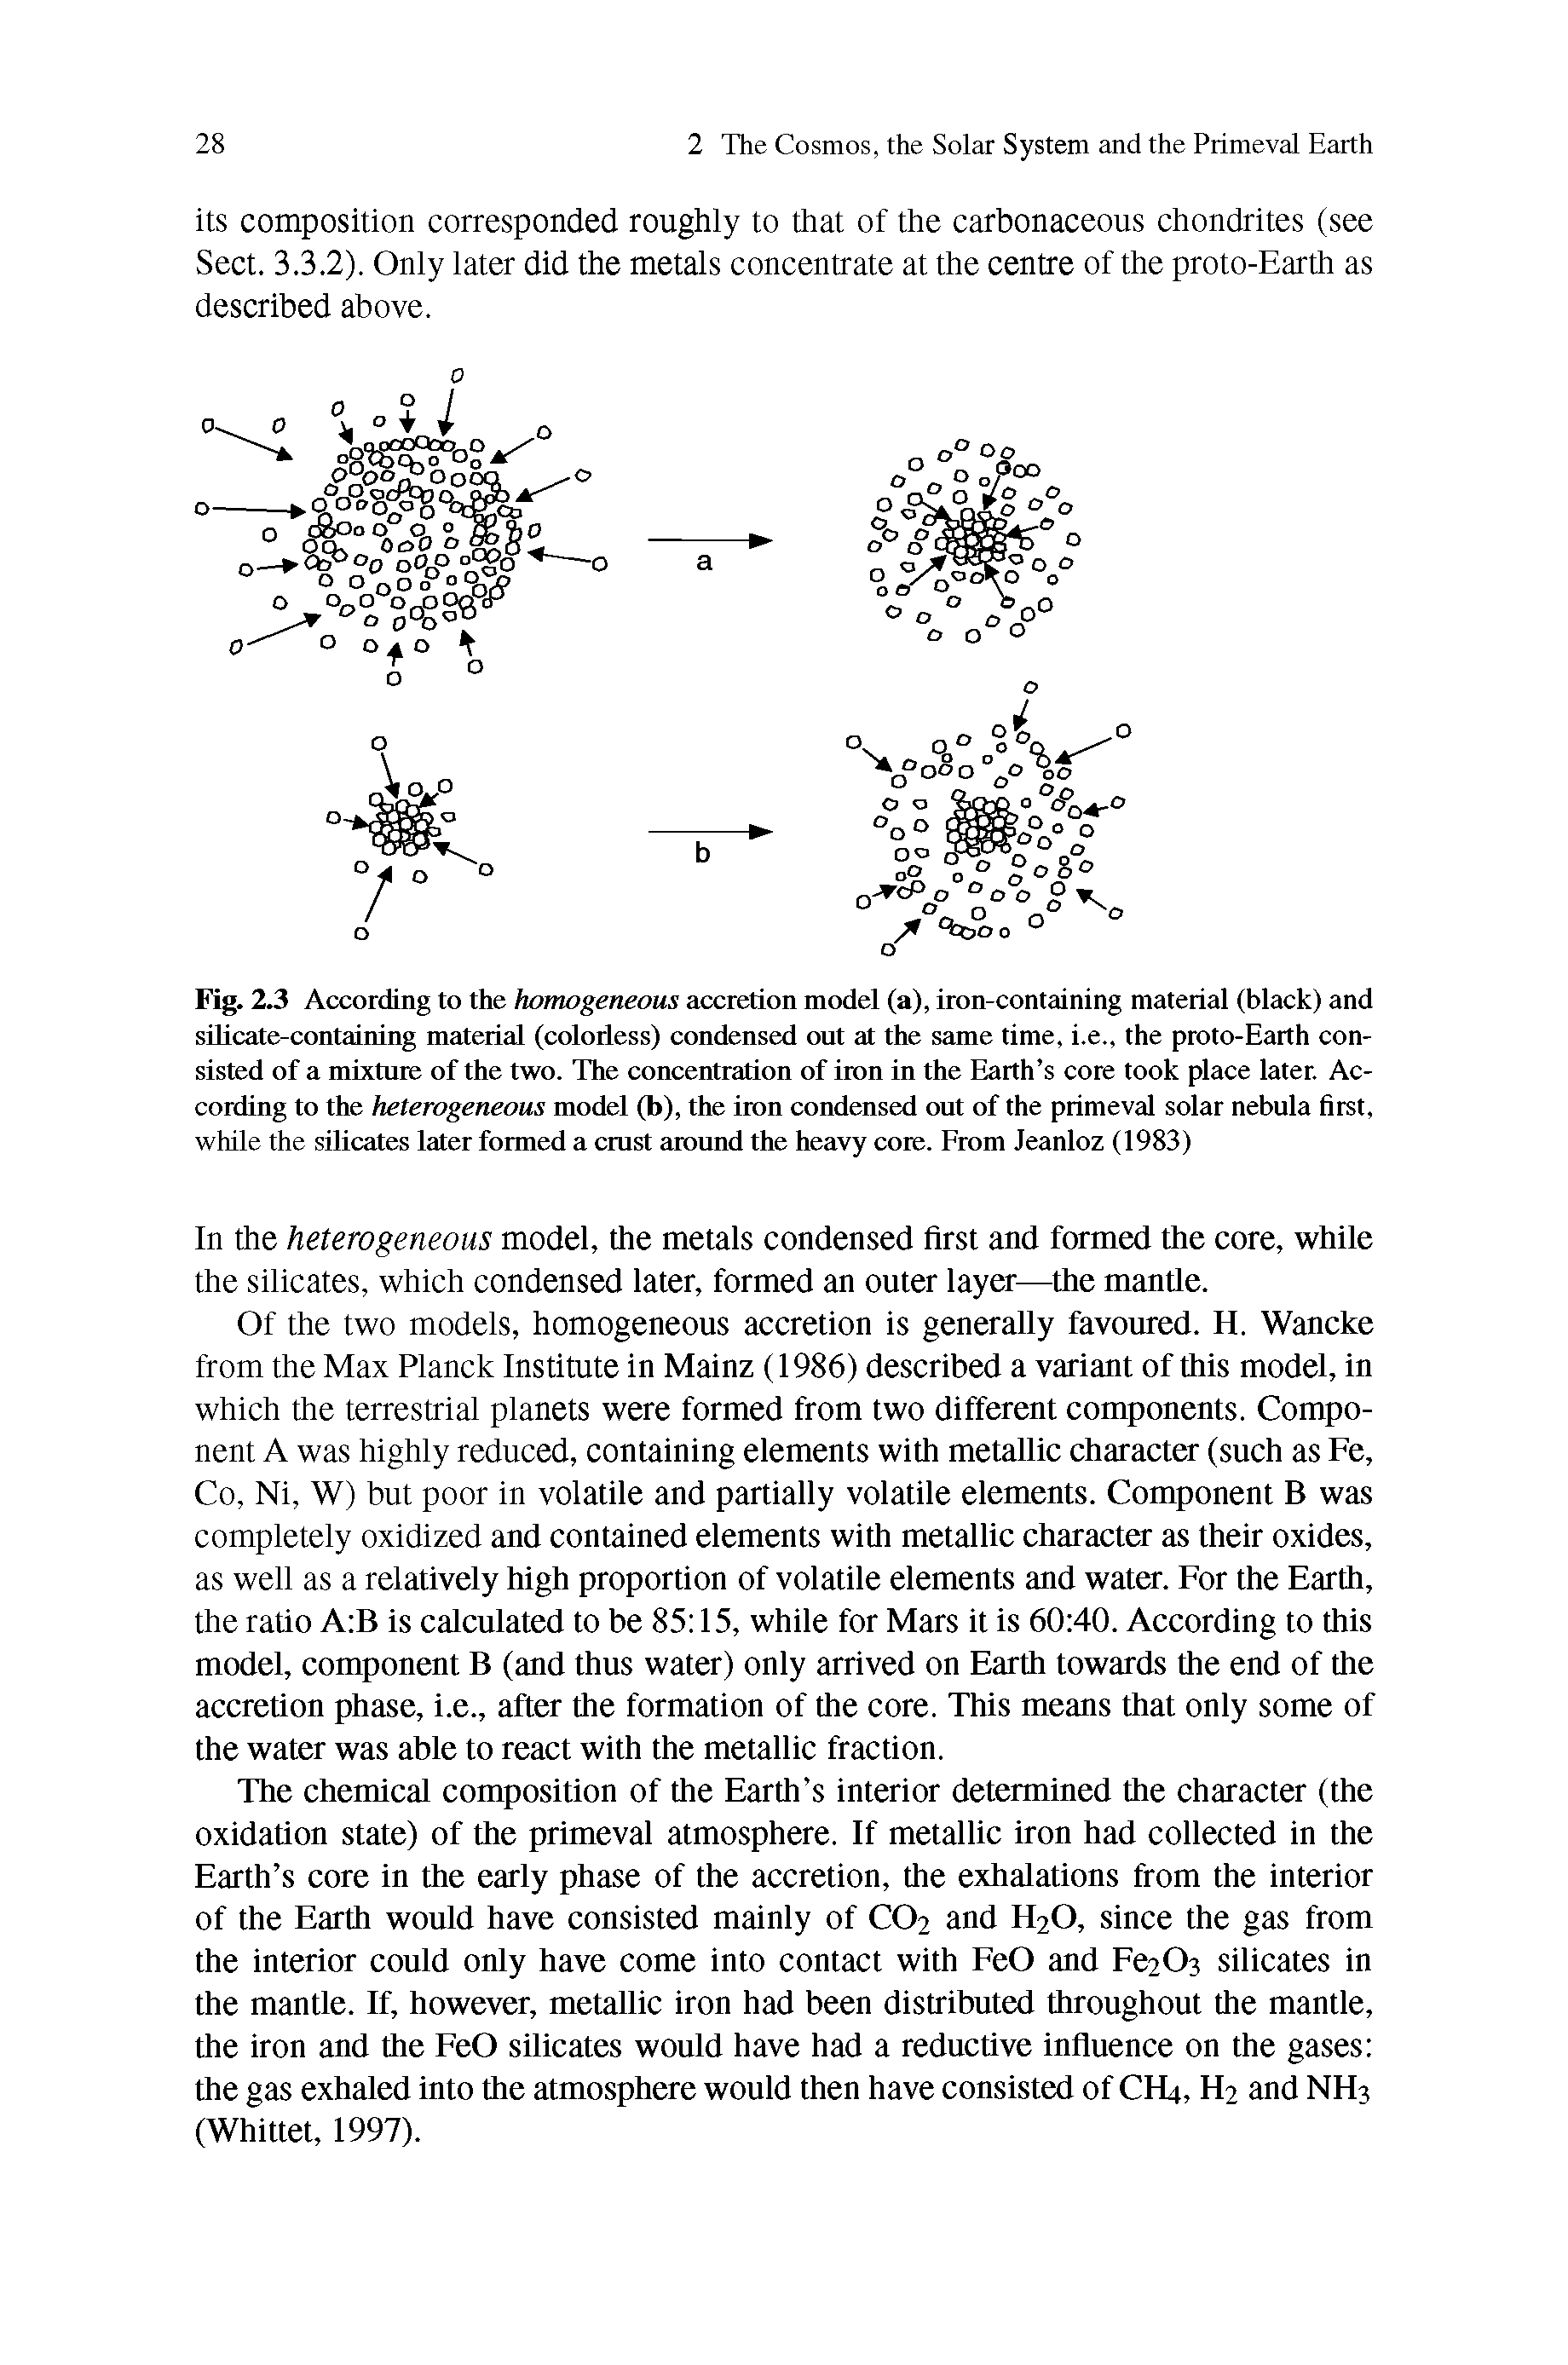 Fig. 2.3 According to the homogeneous accretion model (a), iron-containing material (black) and silicate-containing material (colorless) condensed out at the same time, i.e., the proto-Earth consisted of a mixture of the two. The concentration of iron in the Earth s core took place later. According to the heterogeneous model (b), the iron condensed out of the primeval solar nebula first, while the silicates later formed a crust around the heavy core. From Jeanloz (1983)...